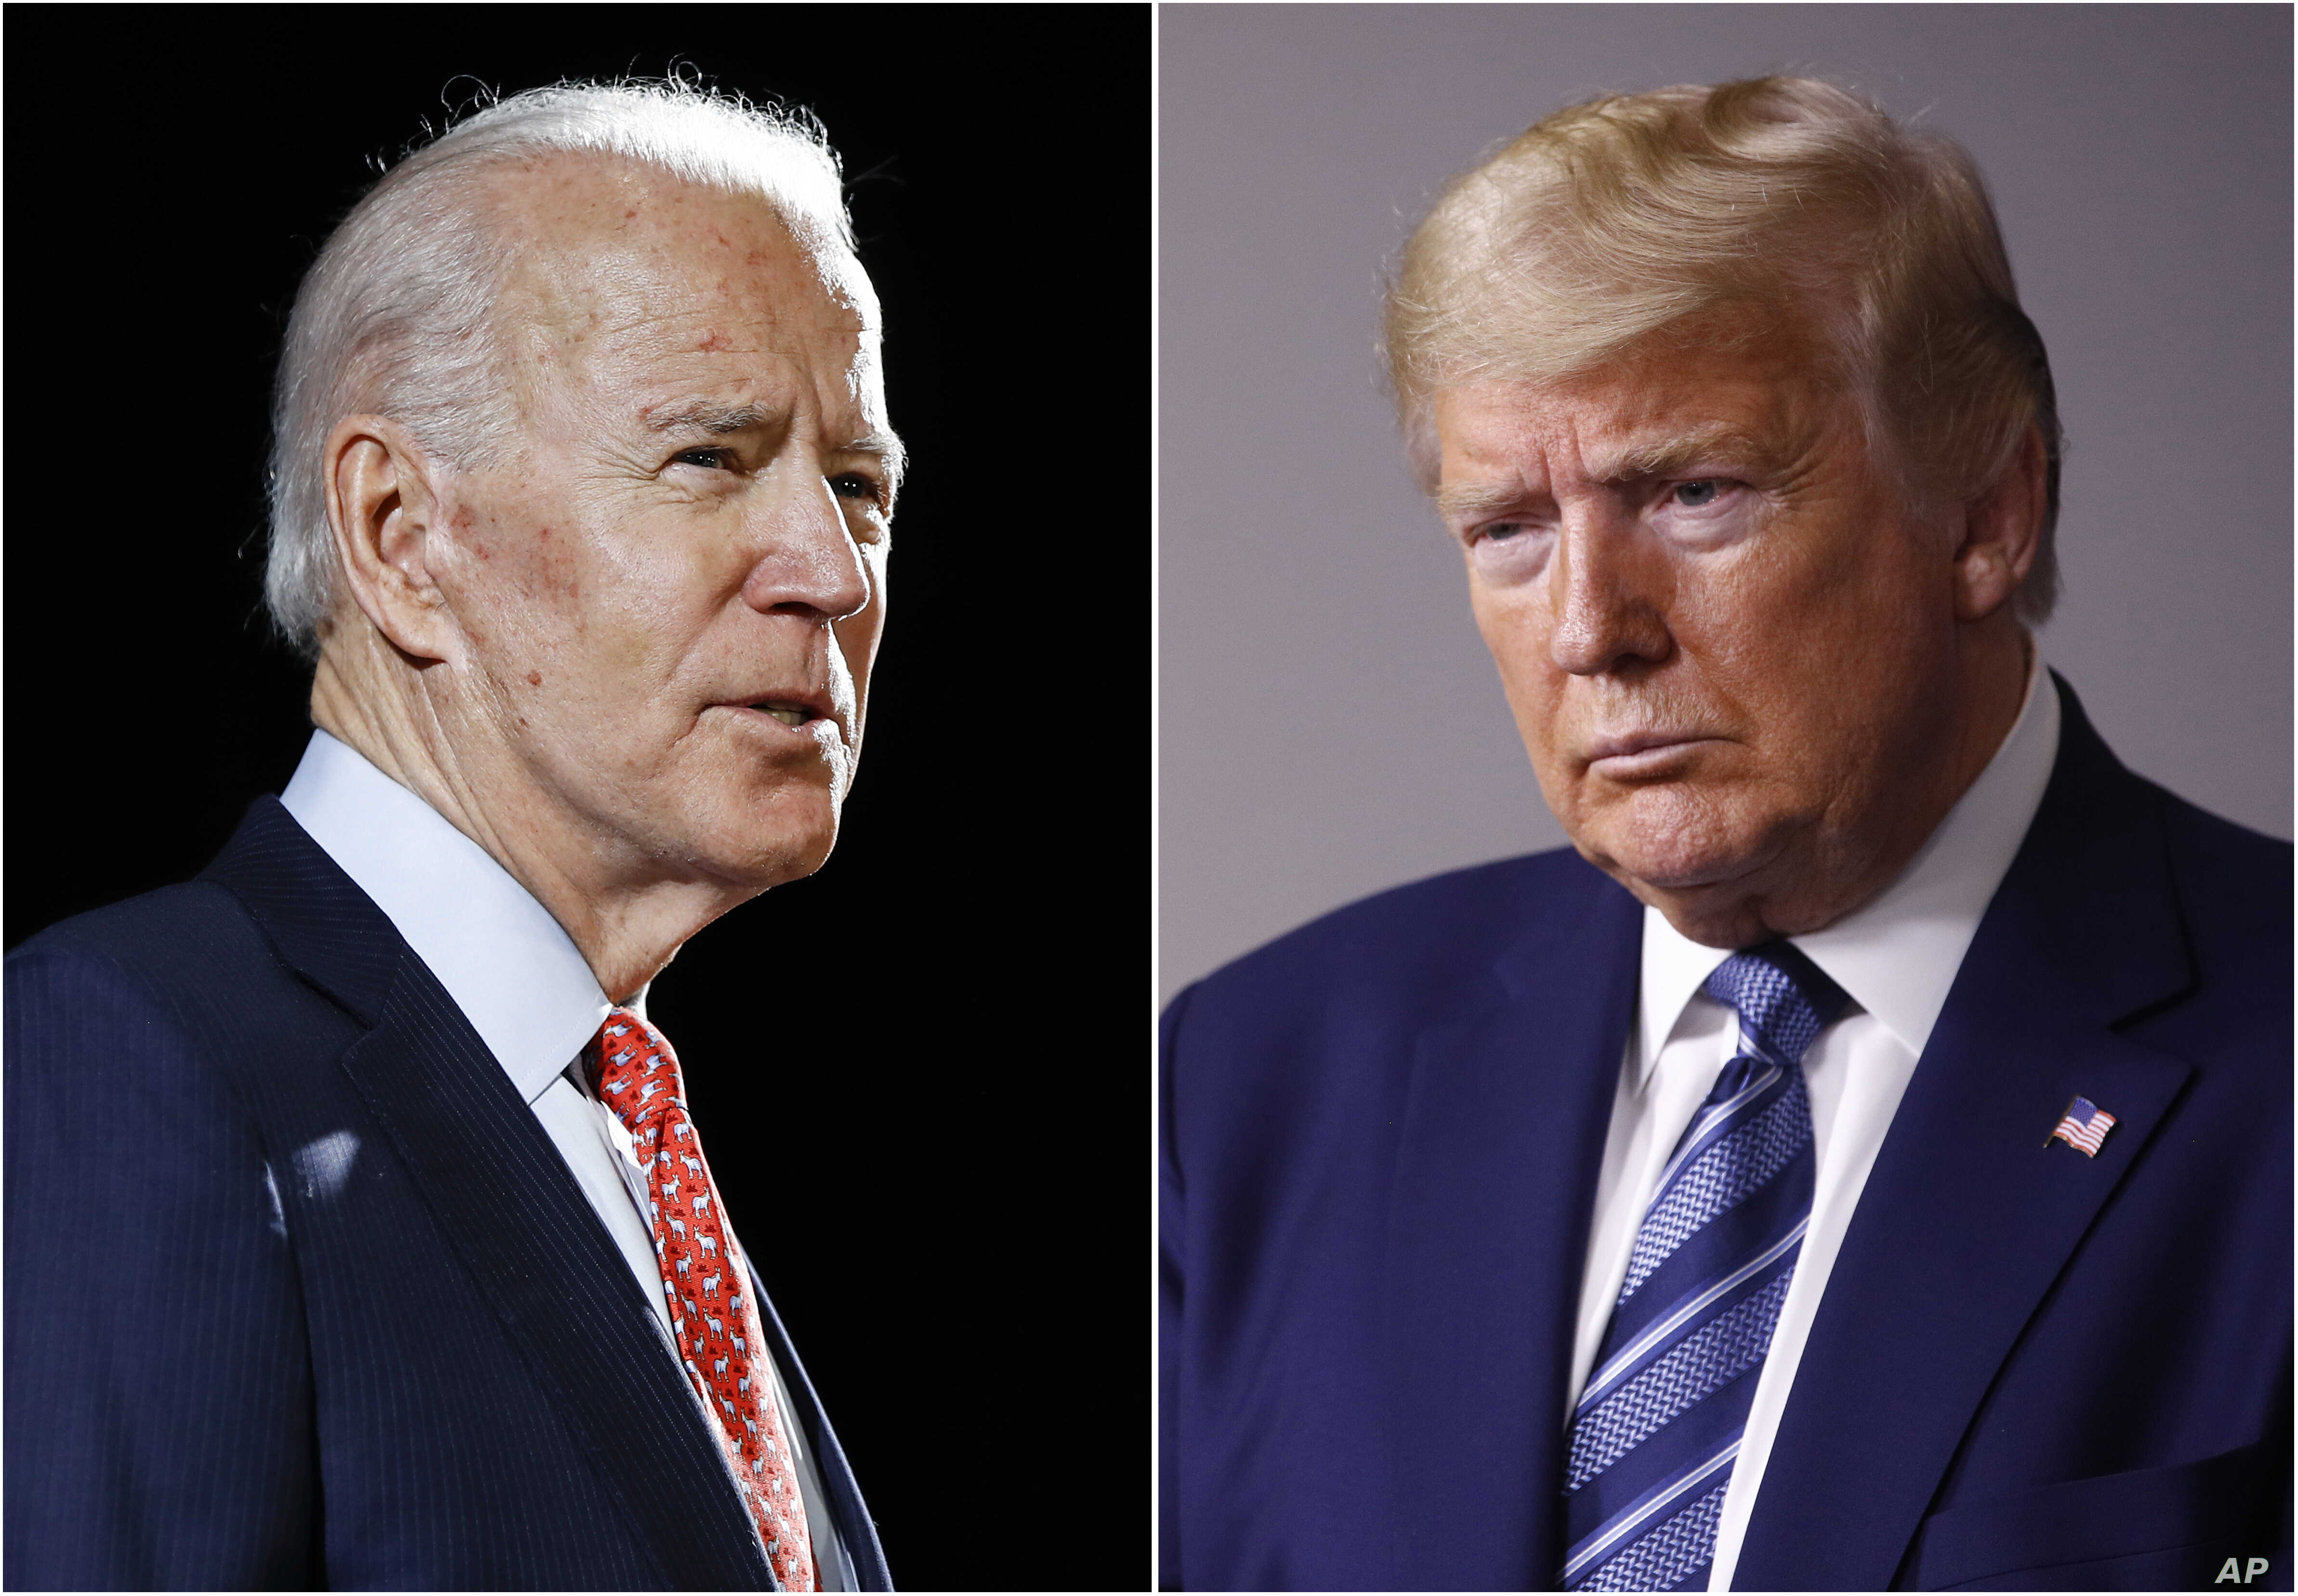 Biden Would Beat Trump by a Landslide, New Reuters Poll Shows. Voice of America